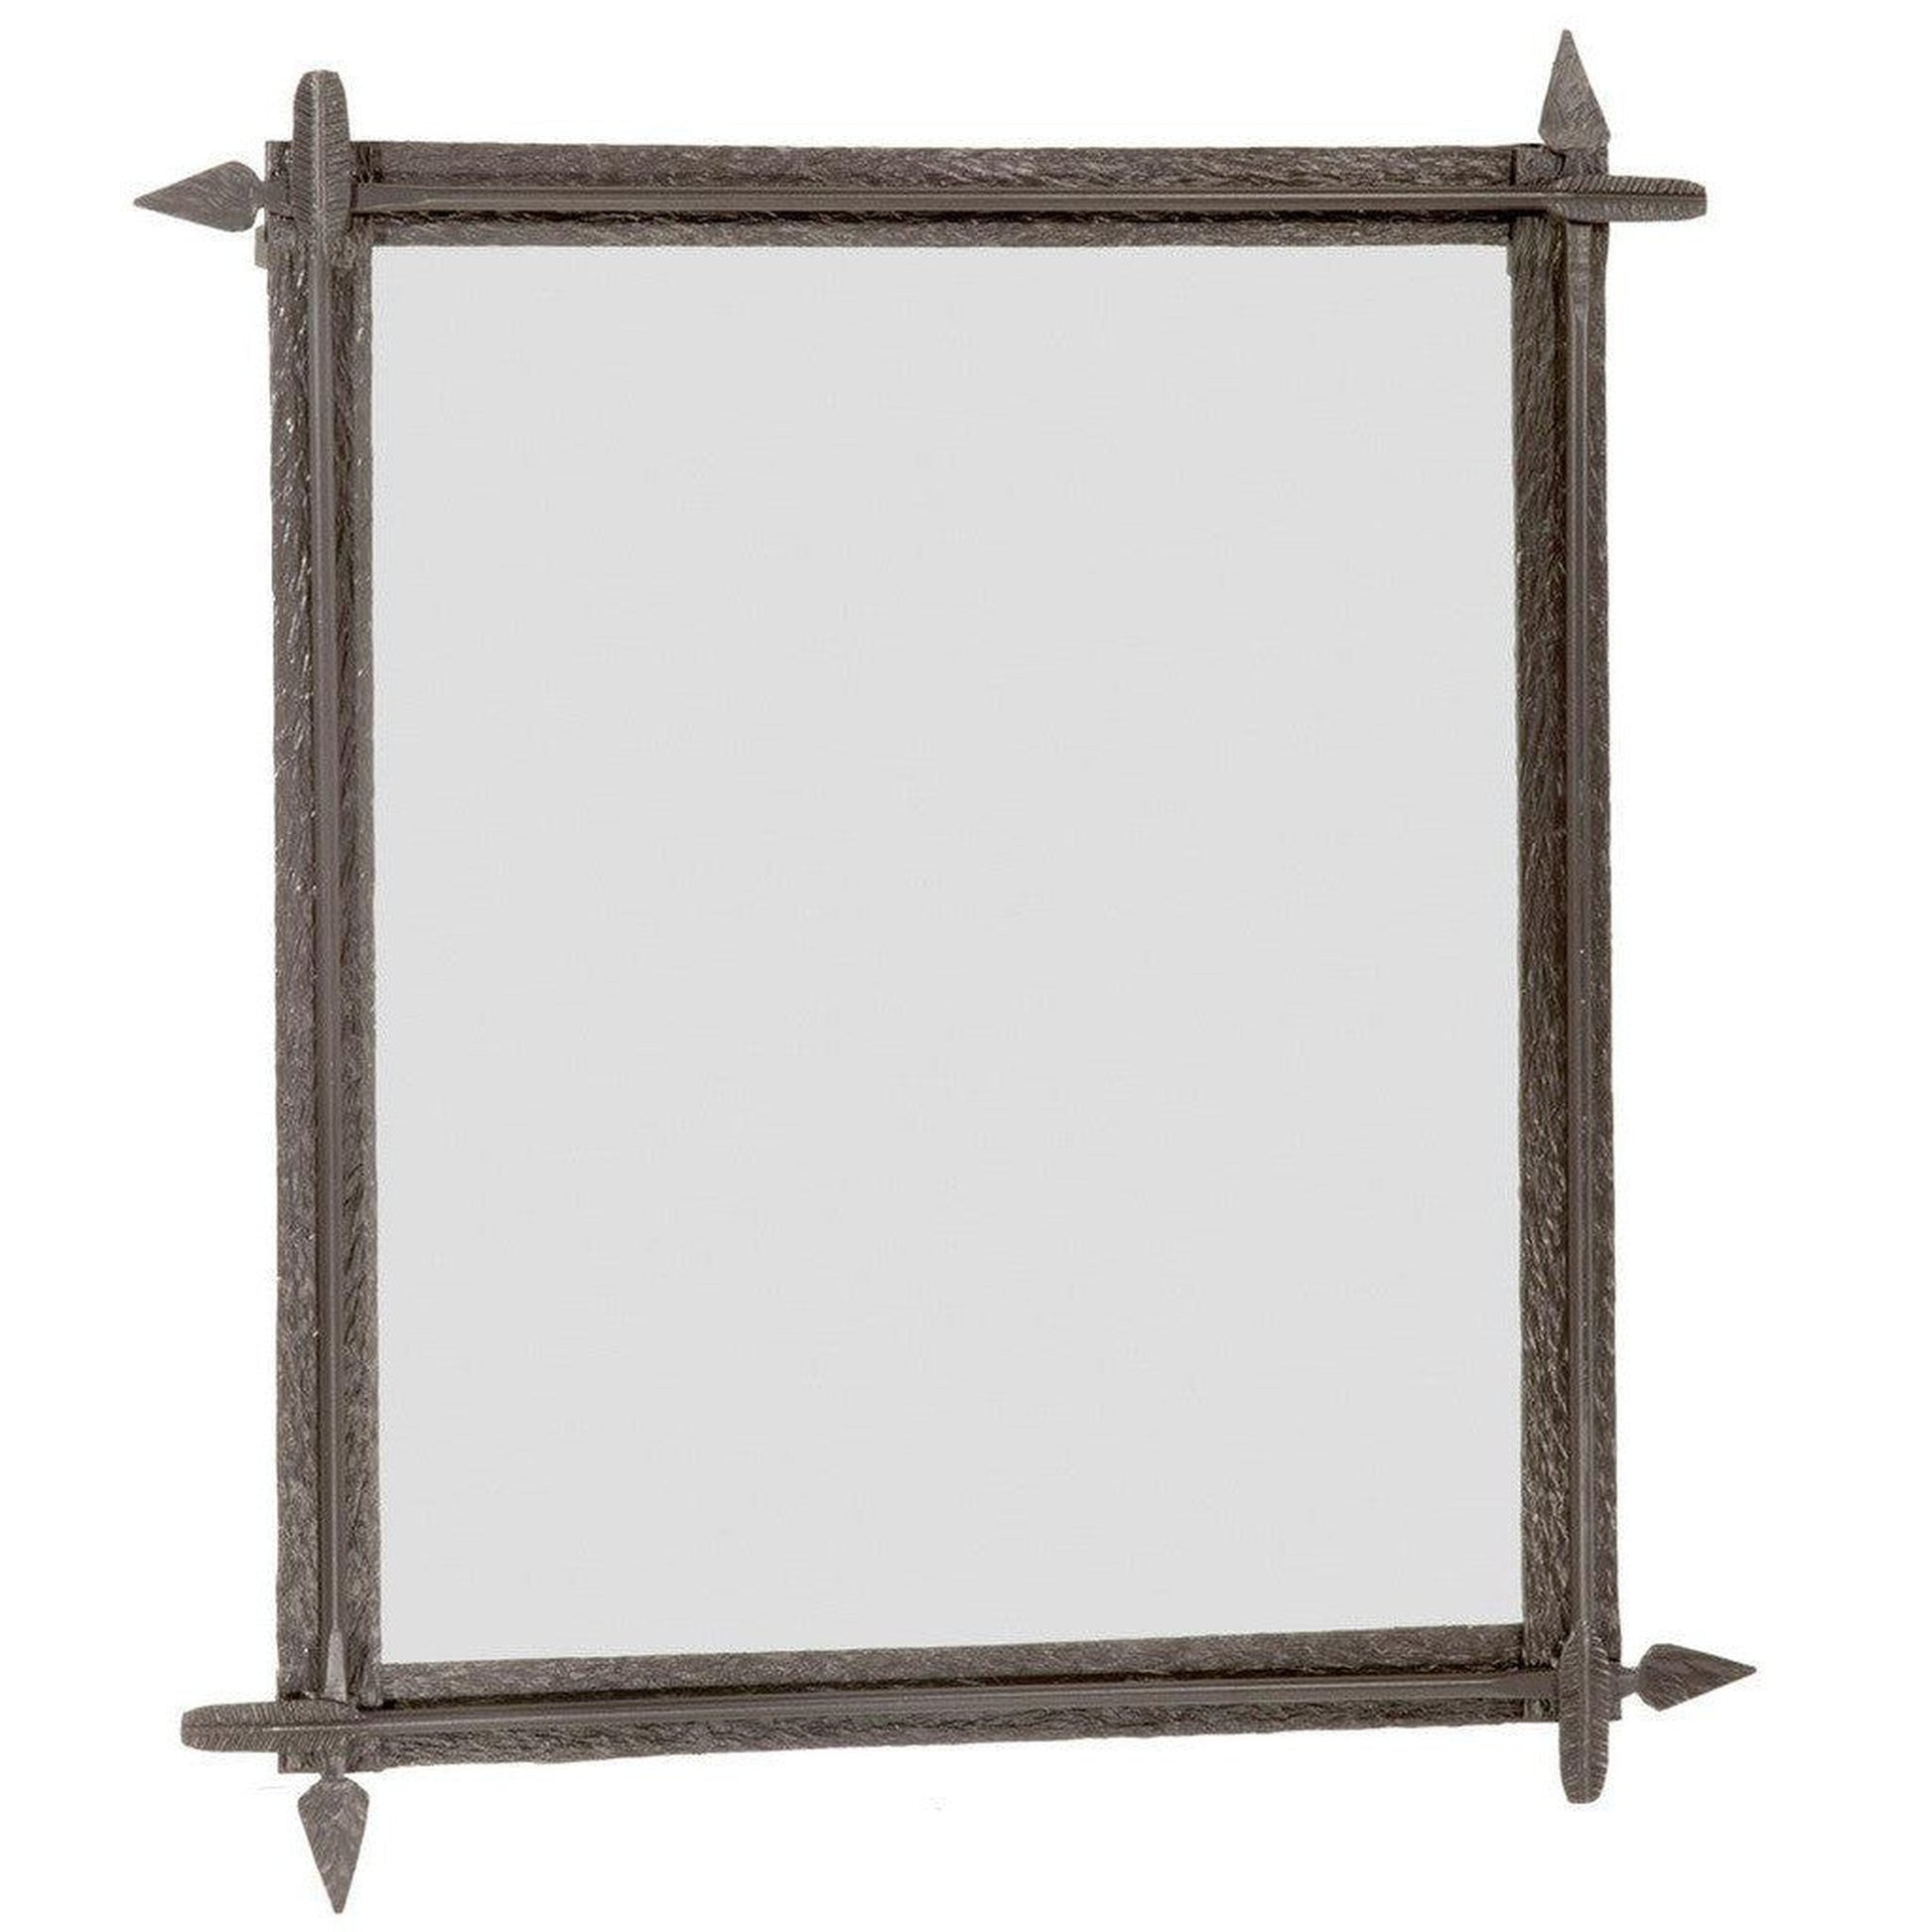 Stone County Ironworks Quapaw 28" x 32" Small Natural Black Iron Wall Mirror With Gold Iron Accent